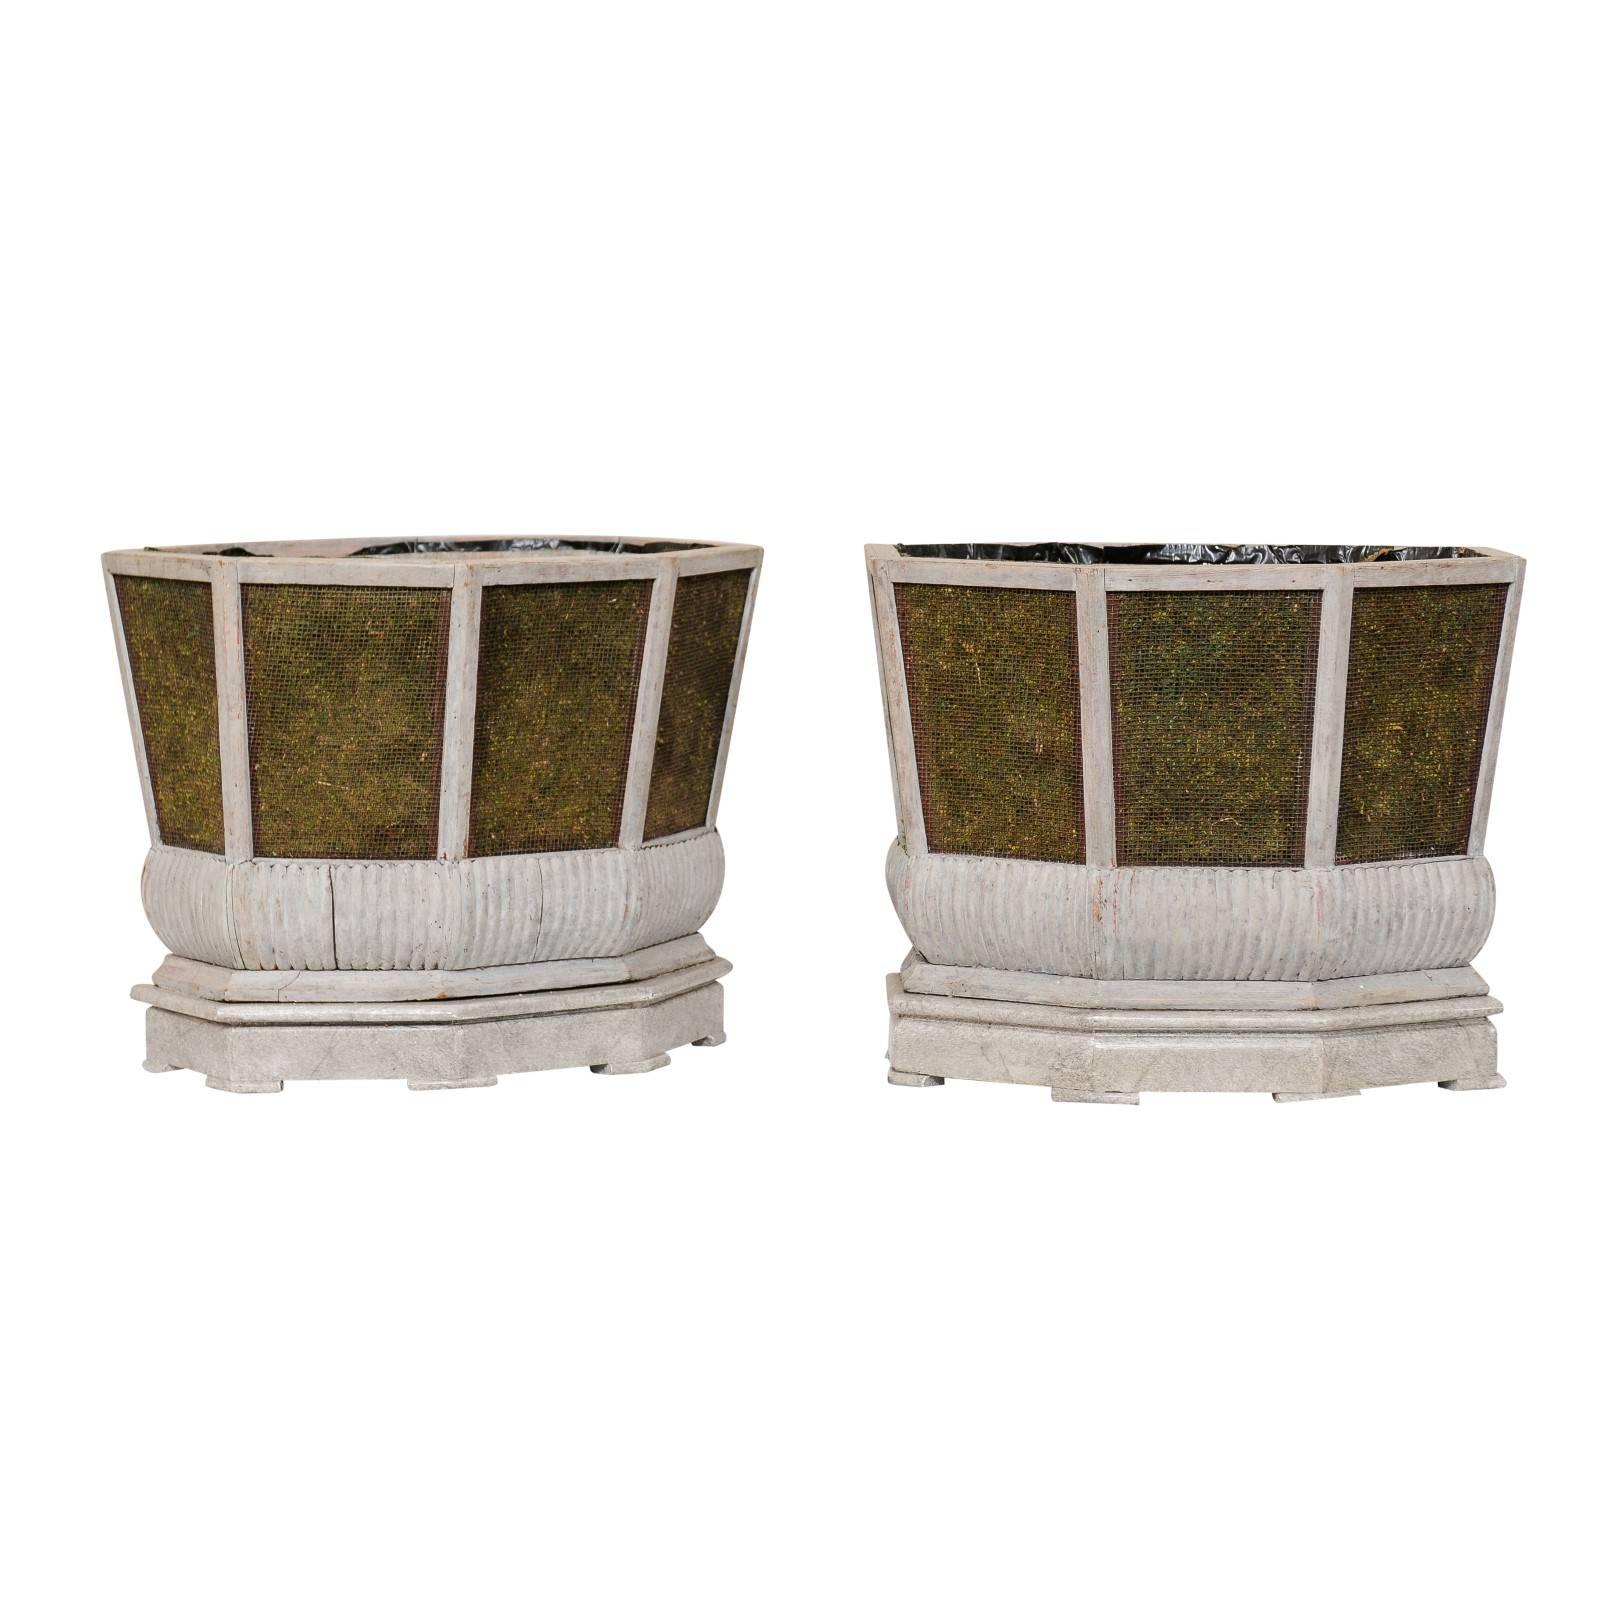 Pair of Unique Swedish Planters of Wood, Wire and Stone with Moss Inside, 1920s